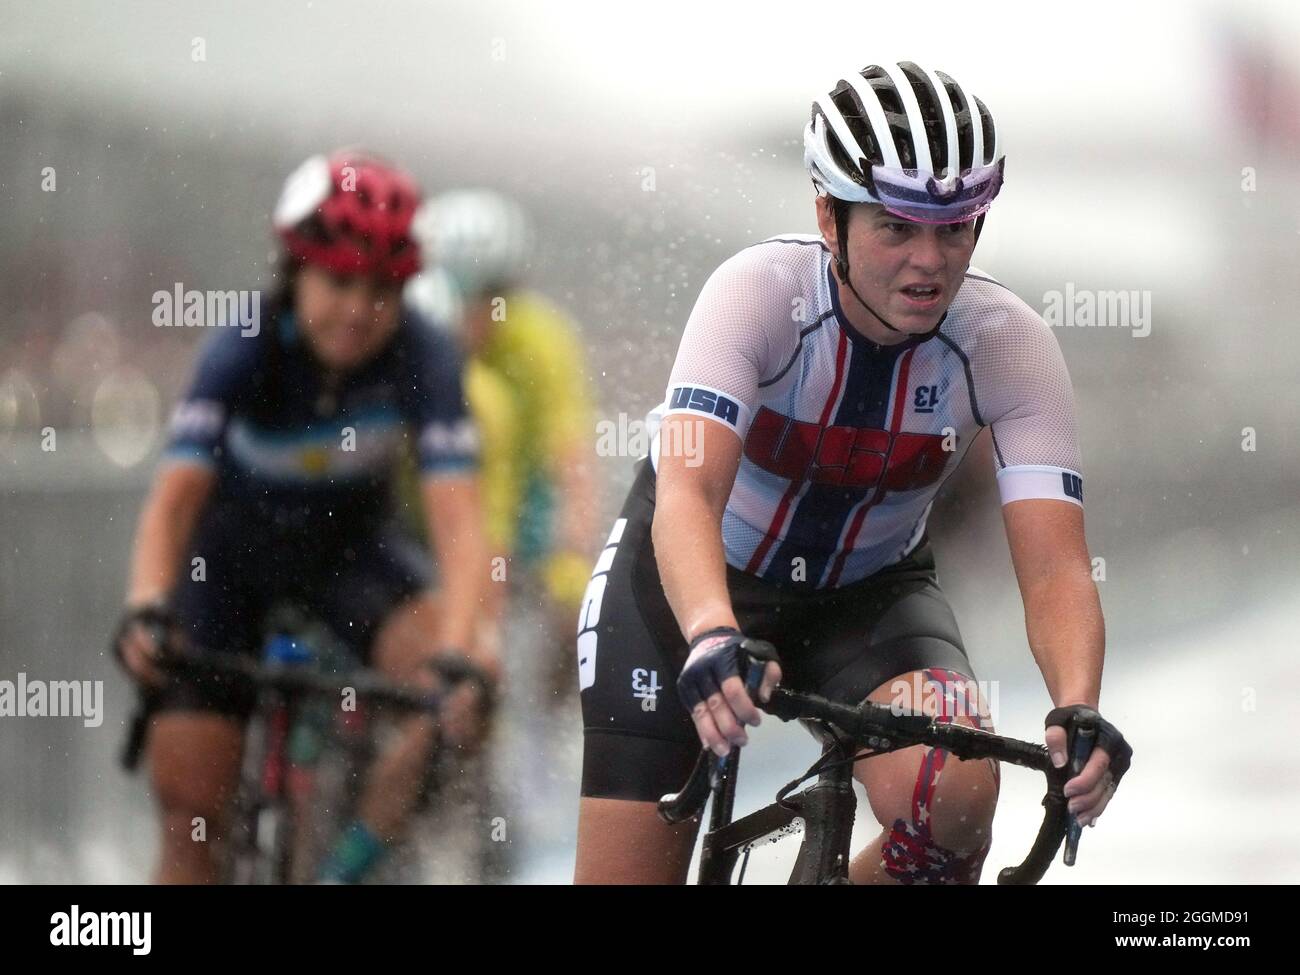 USA's Shawn Morelli competes in the Women's C4-5 Road Race at the Fuji ...